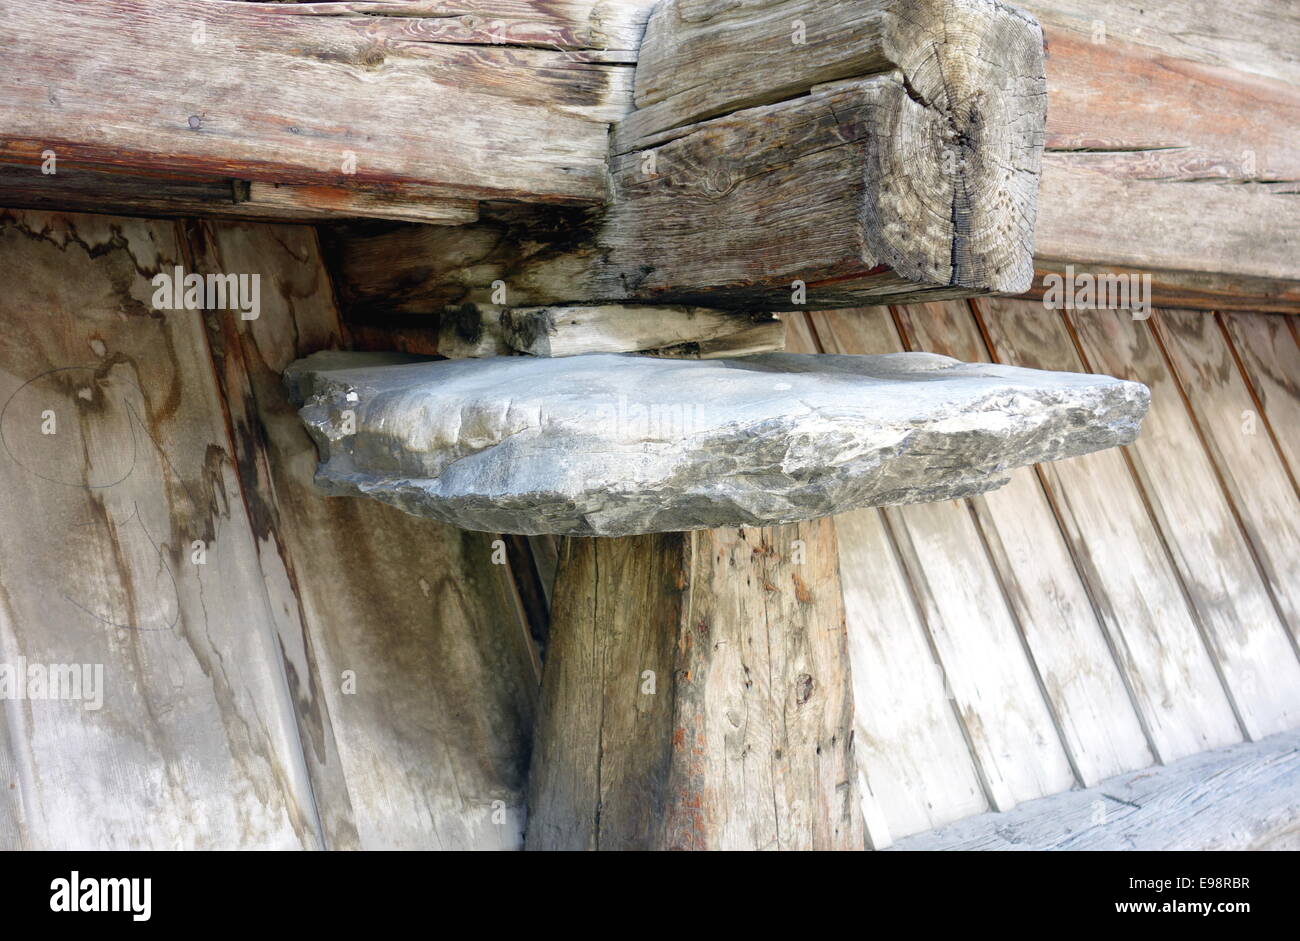 Rock supporting a wooden structure Stock Photo